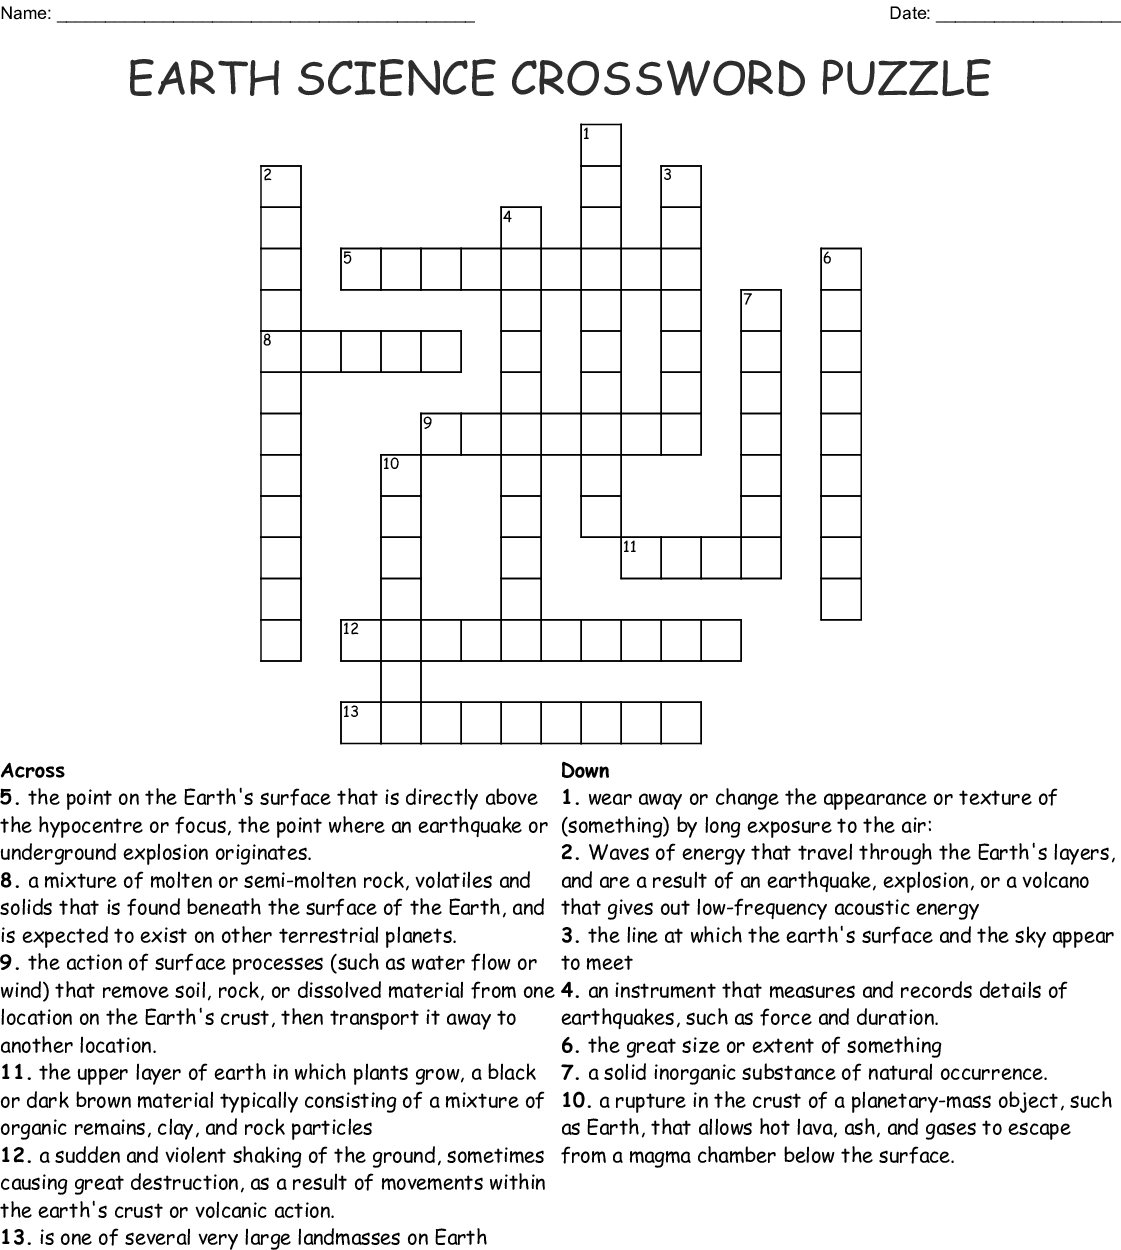 Free Printable Earth Science Crossword Puzzles